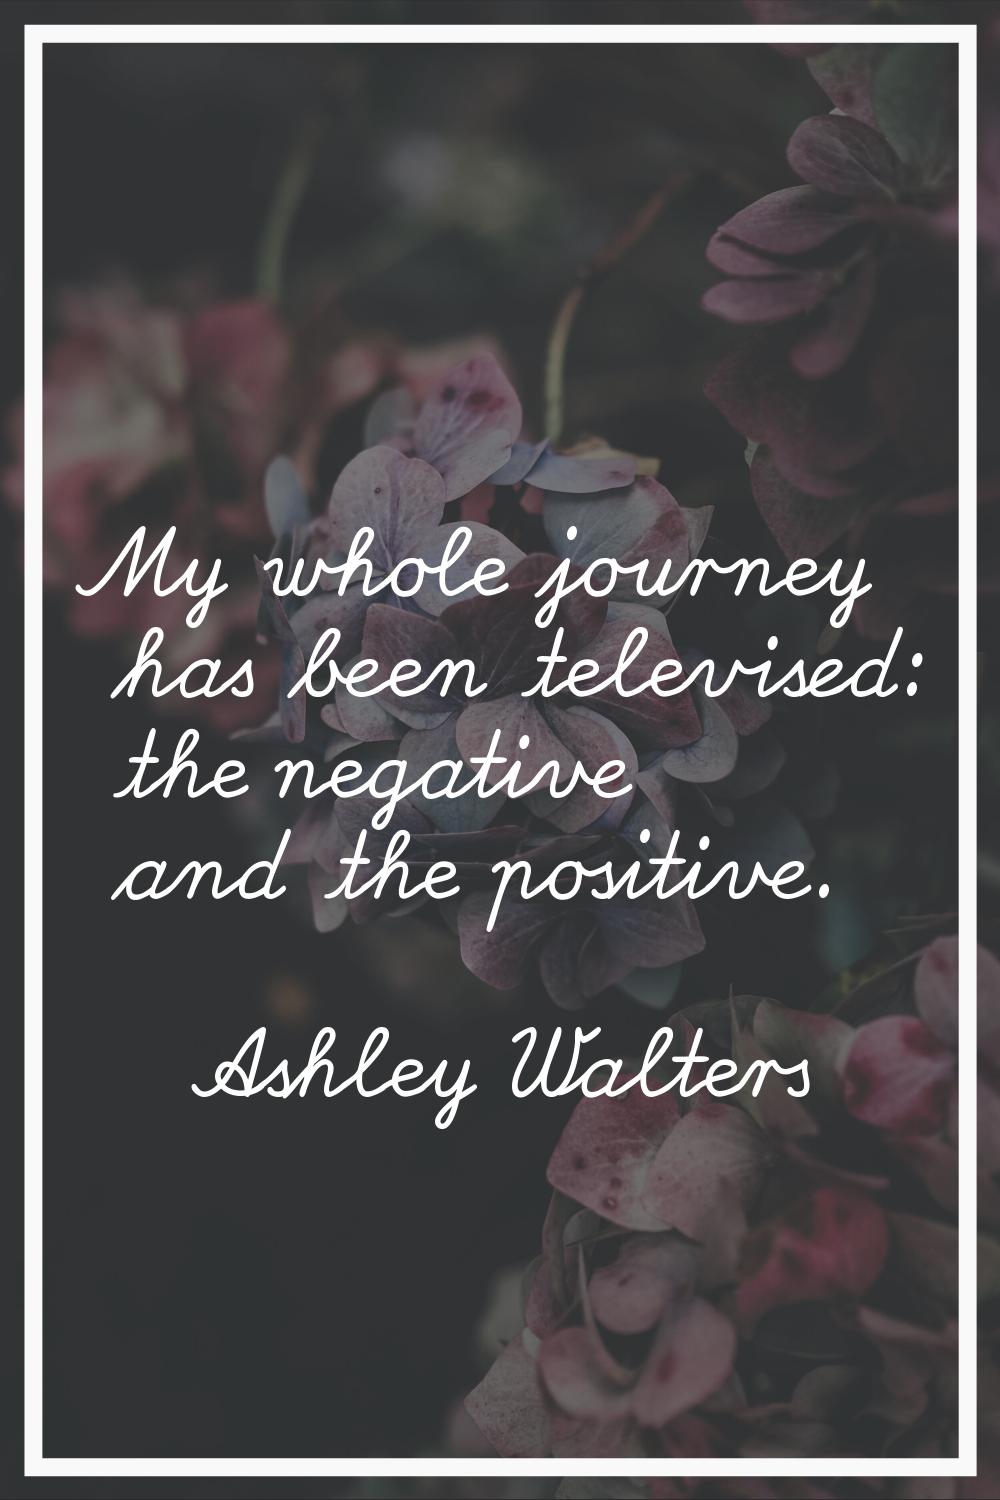 My whole journey has been televised: the negative and the positive.